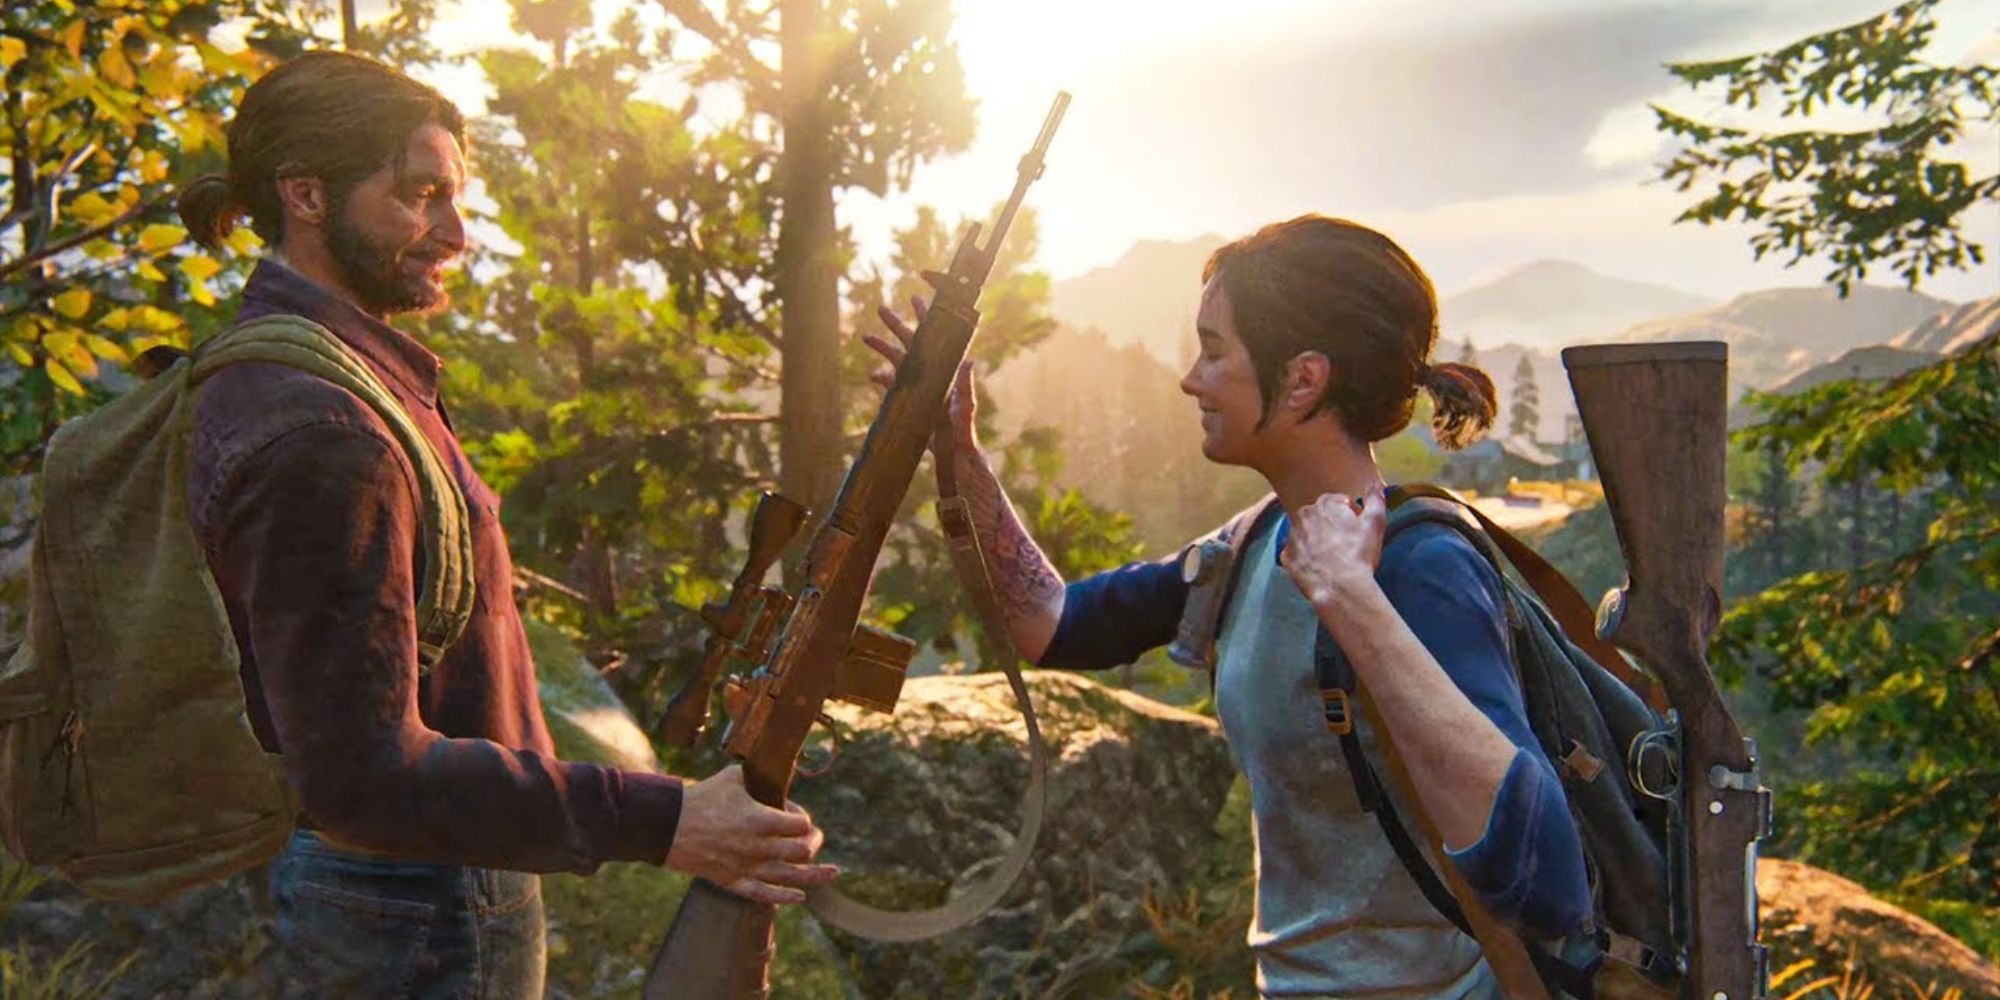 Tommy handing Ellie a rifle